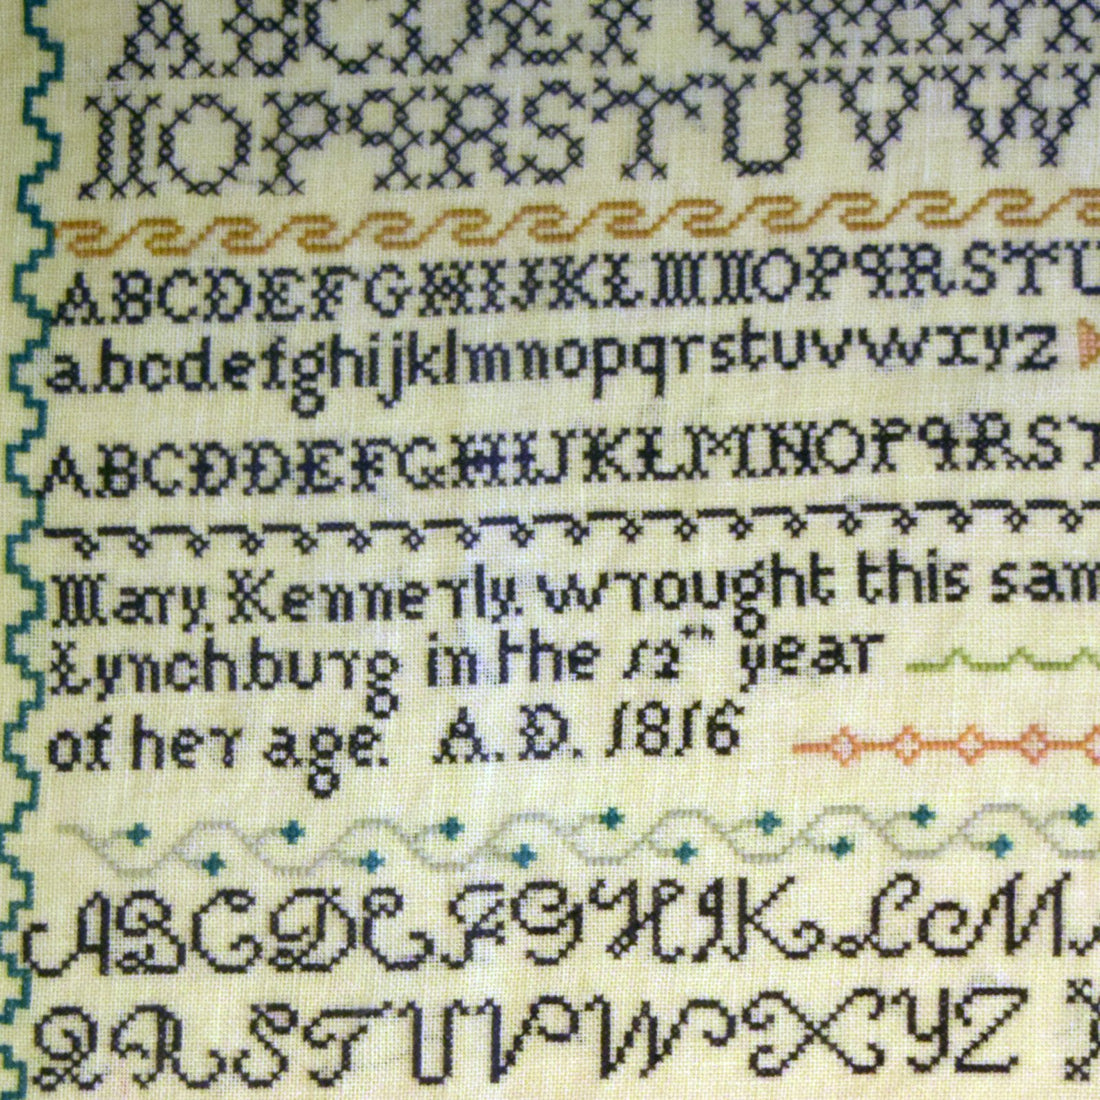 Historical cross stitch sampler originally worked by Mary Kennerly and copied by Diane Soar